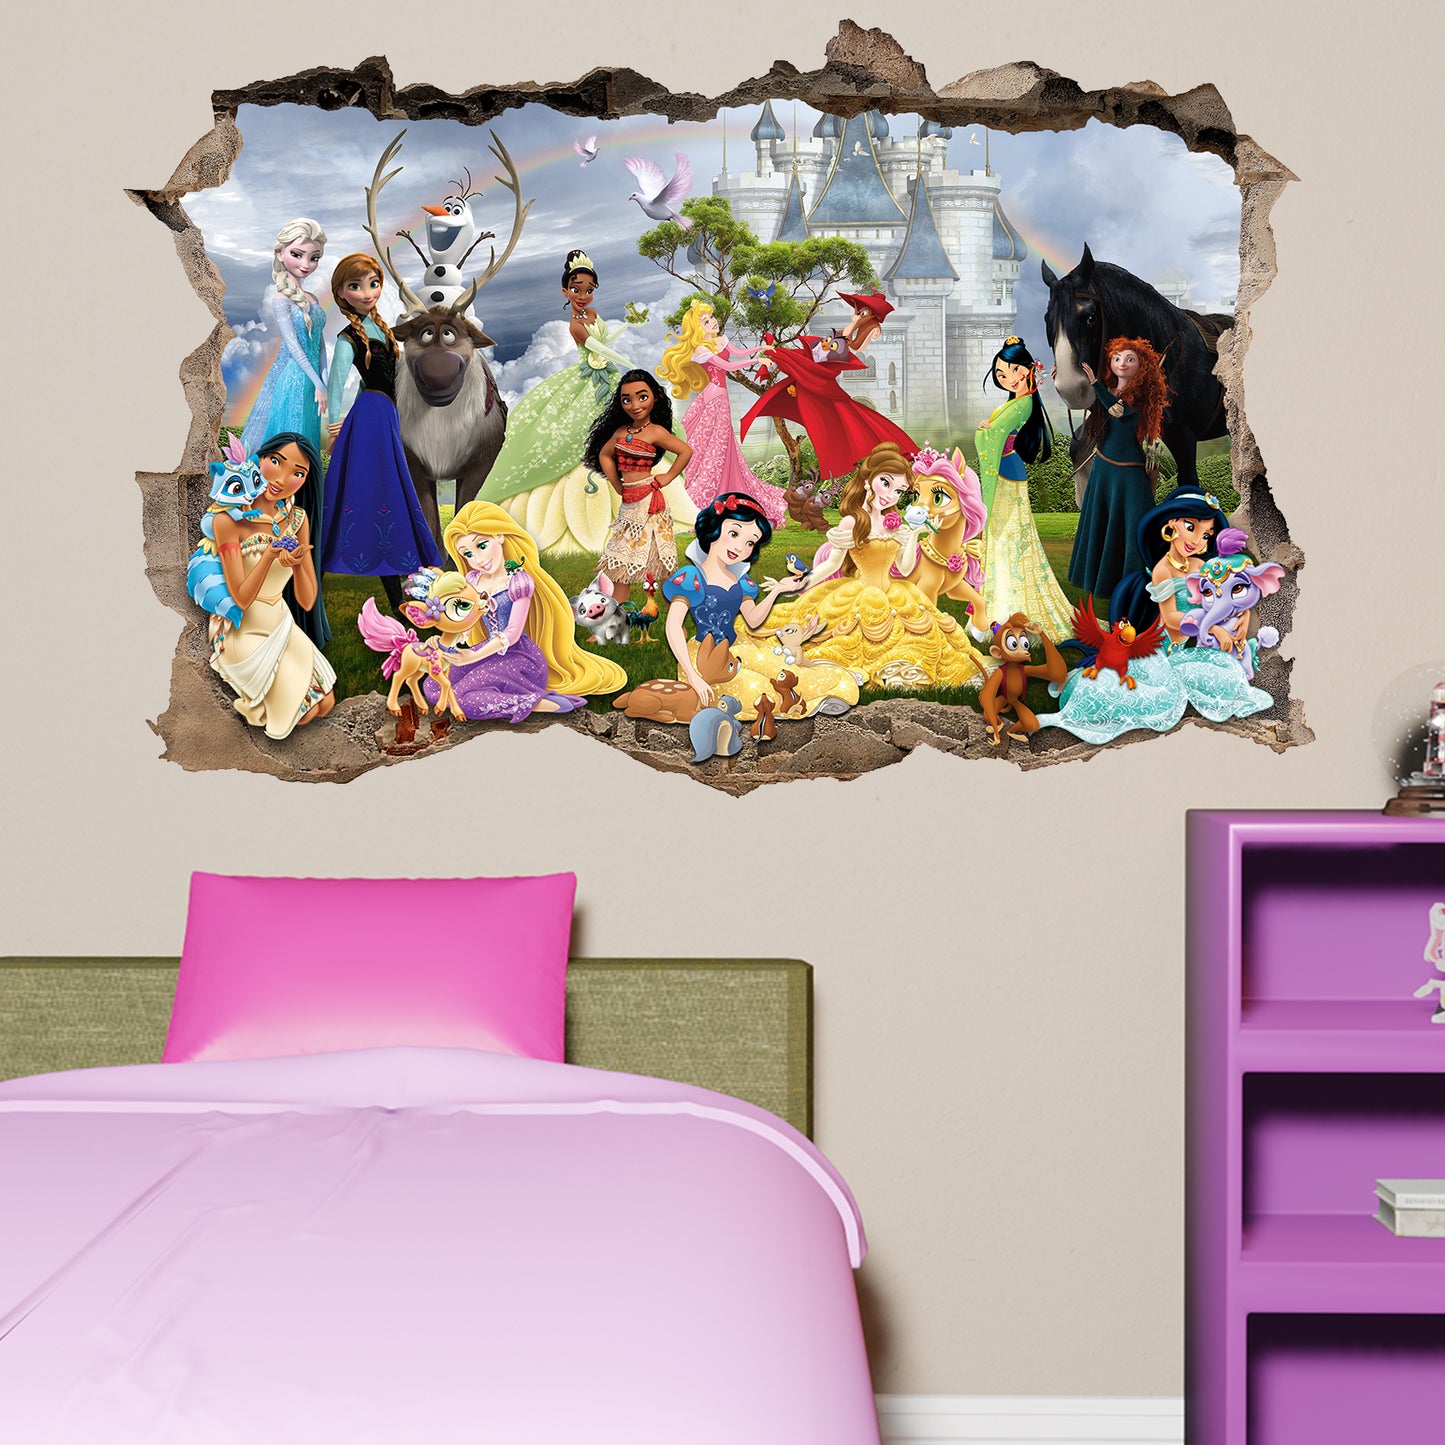 Disney Castle Princess Characters and Pets Wall Sticker Art Poster Decal Mural  Nursery Girls Room Decor 1083